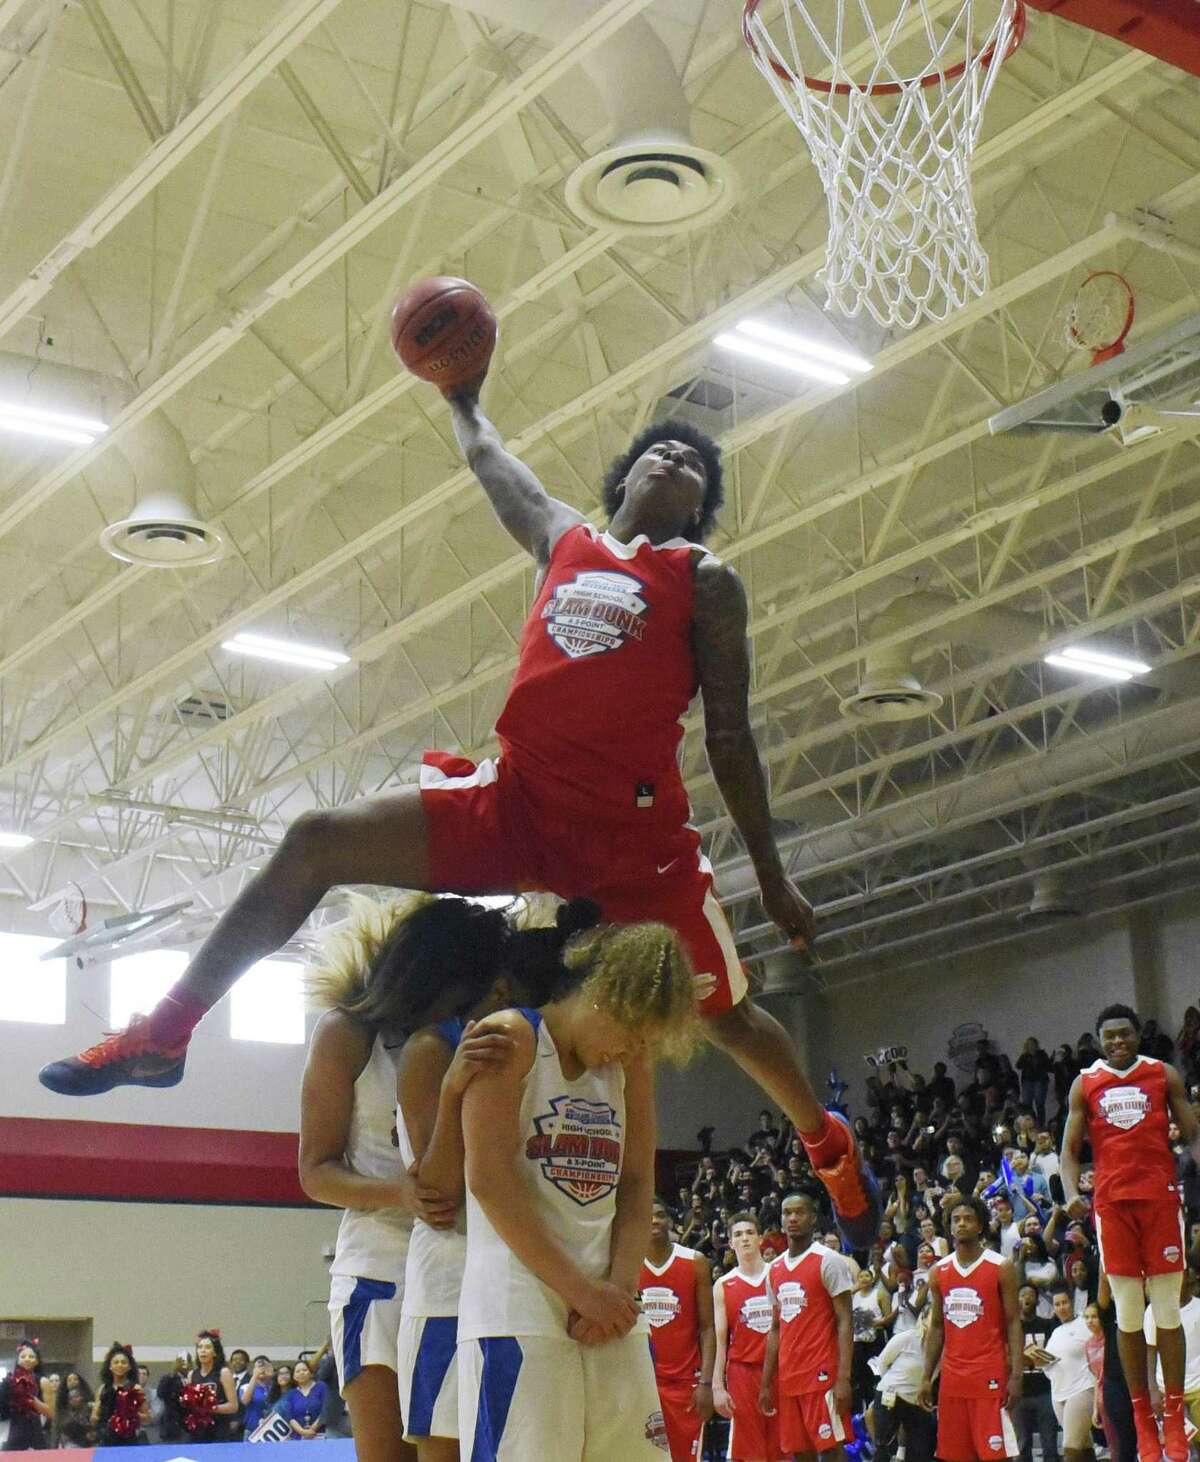 Kevin Porter jumps over three people on a dunk during the American Family Insurance Slam Dunk and 3-Point Championships at Wagner High School on Tuesday, March 27, 2018. The contest coincides with the NCAA Final Four in San Antonio.